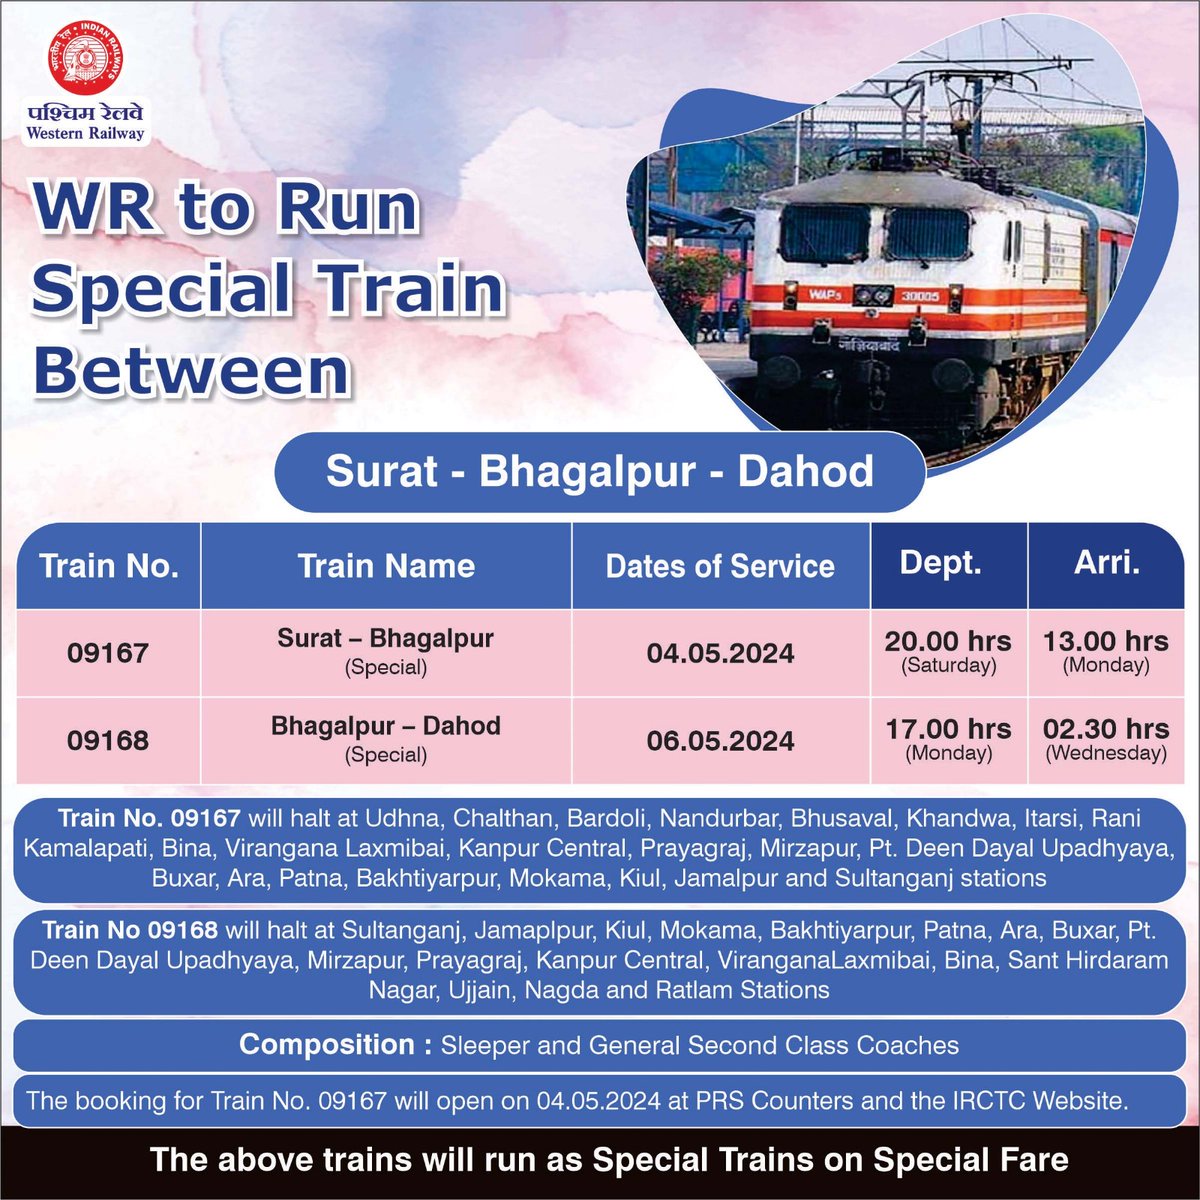 WR will run 09167/68 Surat - Bhagalpur - Dahod Special for the convenience of passengers and to meet the travel demand.

The booking for train no. 09167 is open at PRS Counters and the IRCTC website. 

#WRUpdates